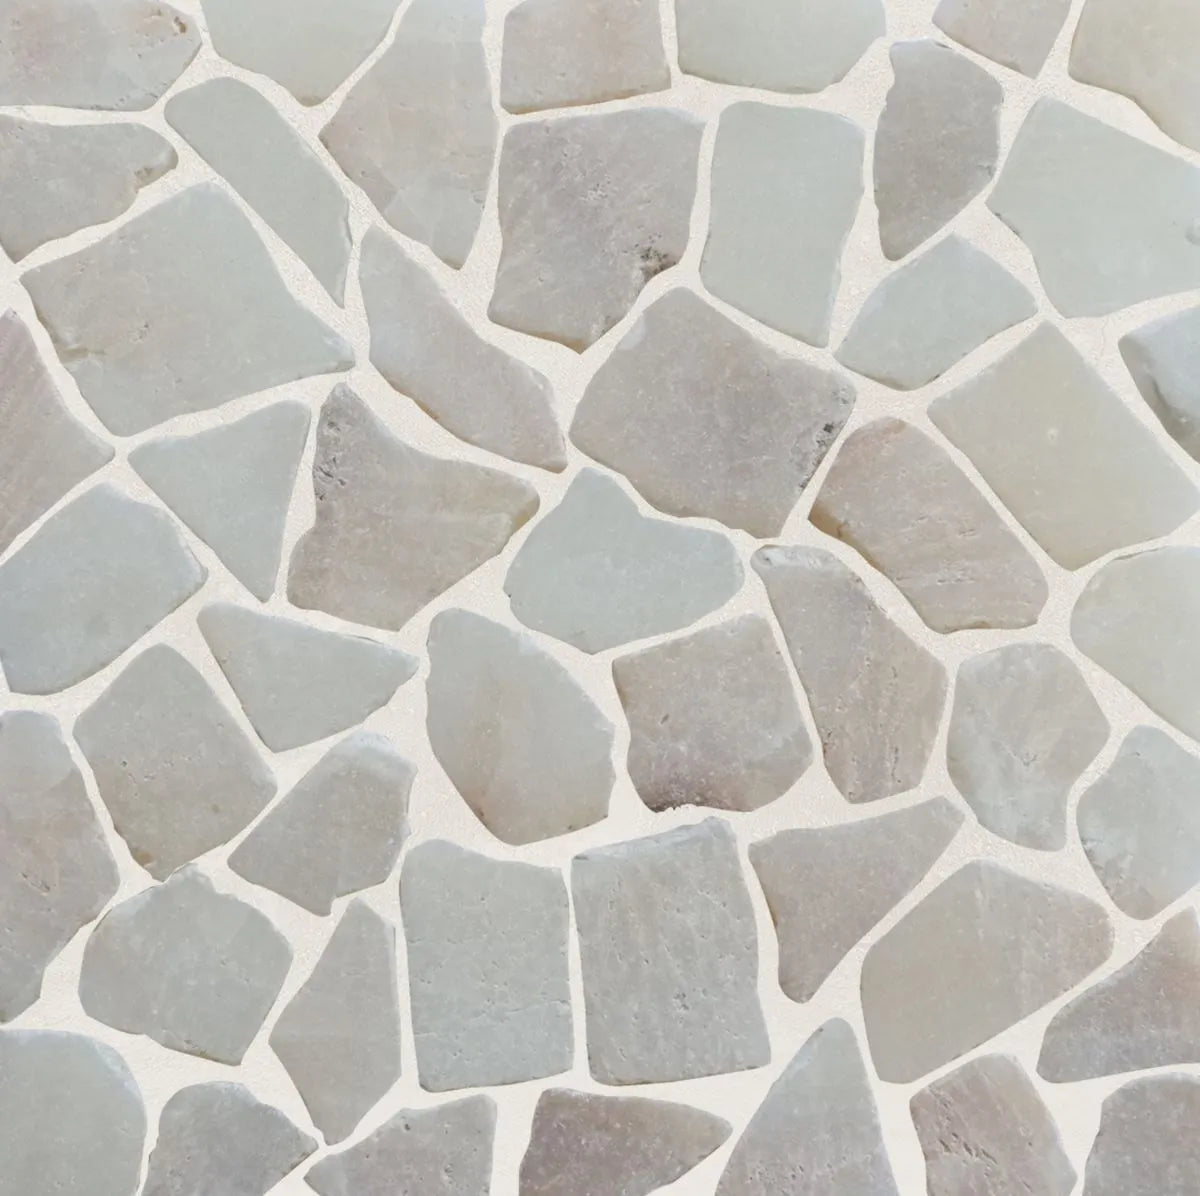 rhino random tile sample close up with grout